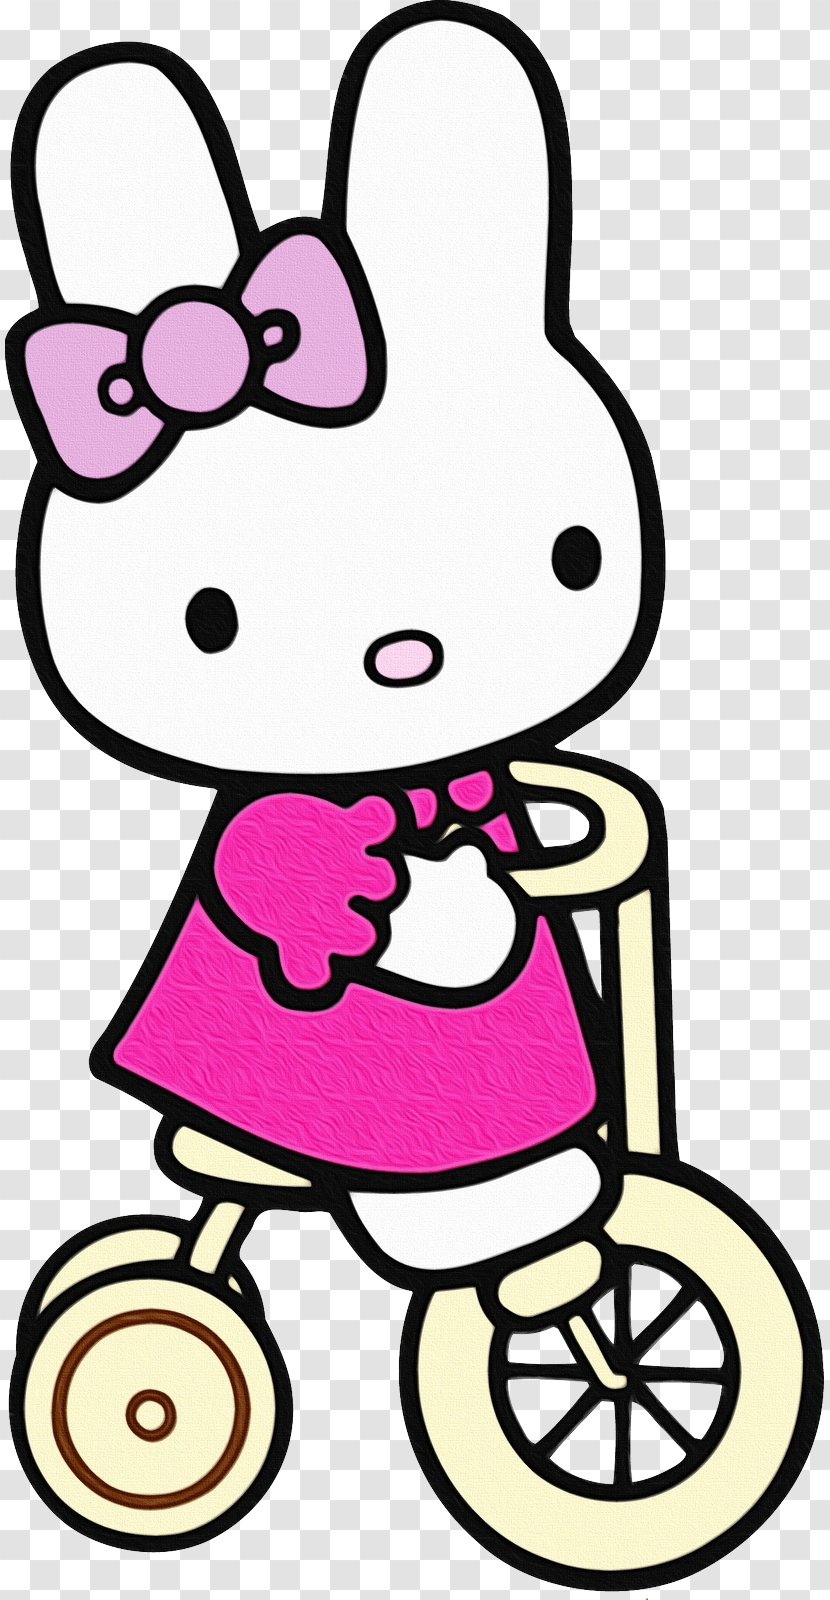 Hello Kitty Samsung Galaxy S6 Art Image - Drawing Transparent PNG